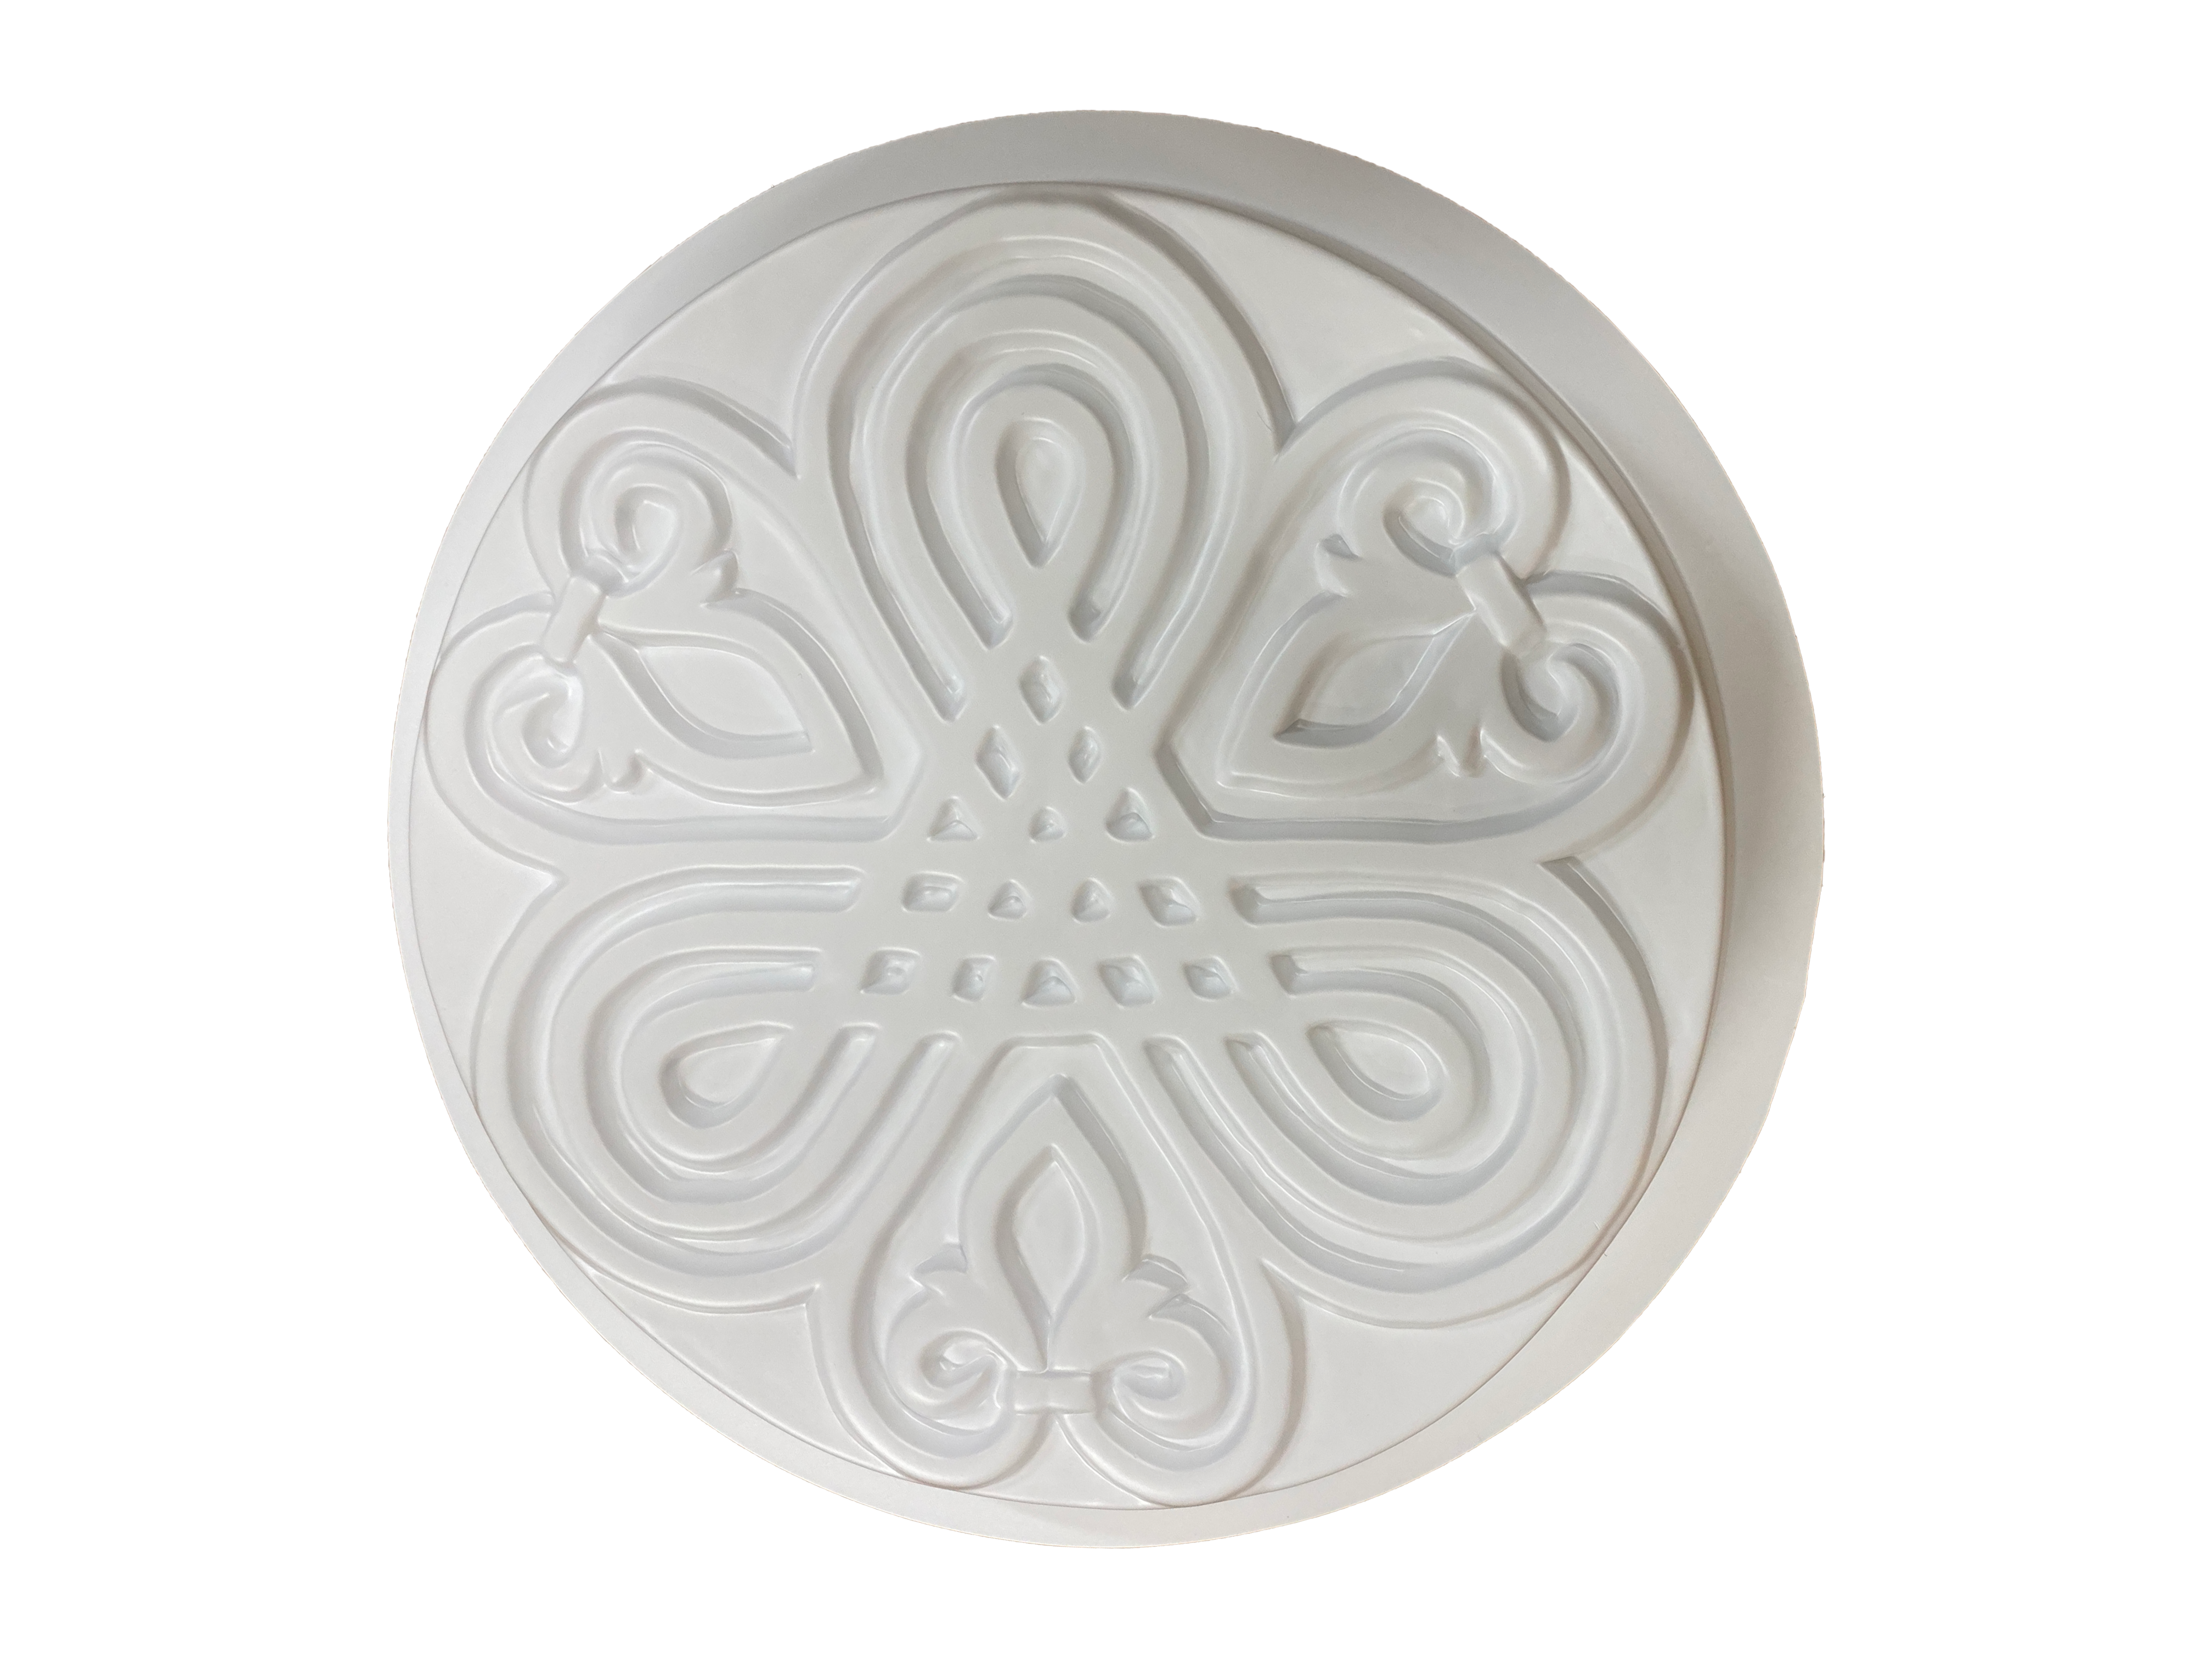 Abs plastic fleur de lis stepping stone mold 10" x 10" x over 1" thick 